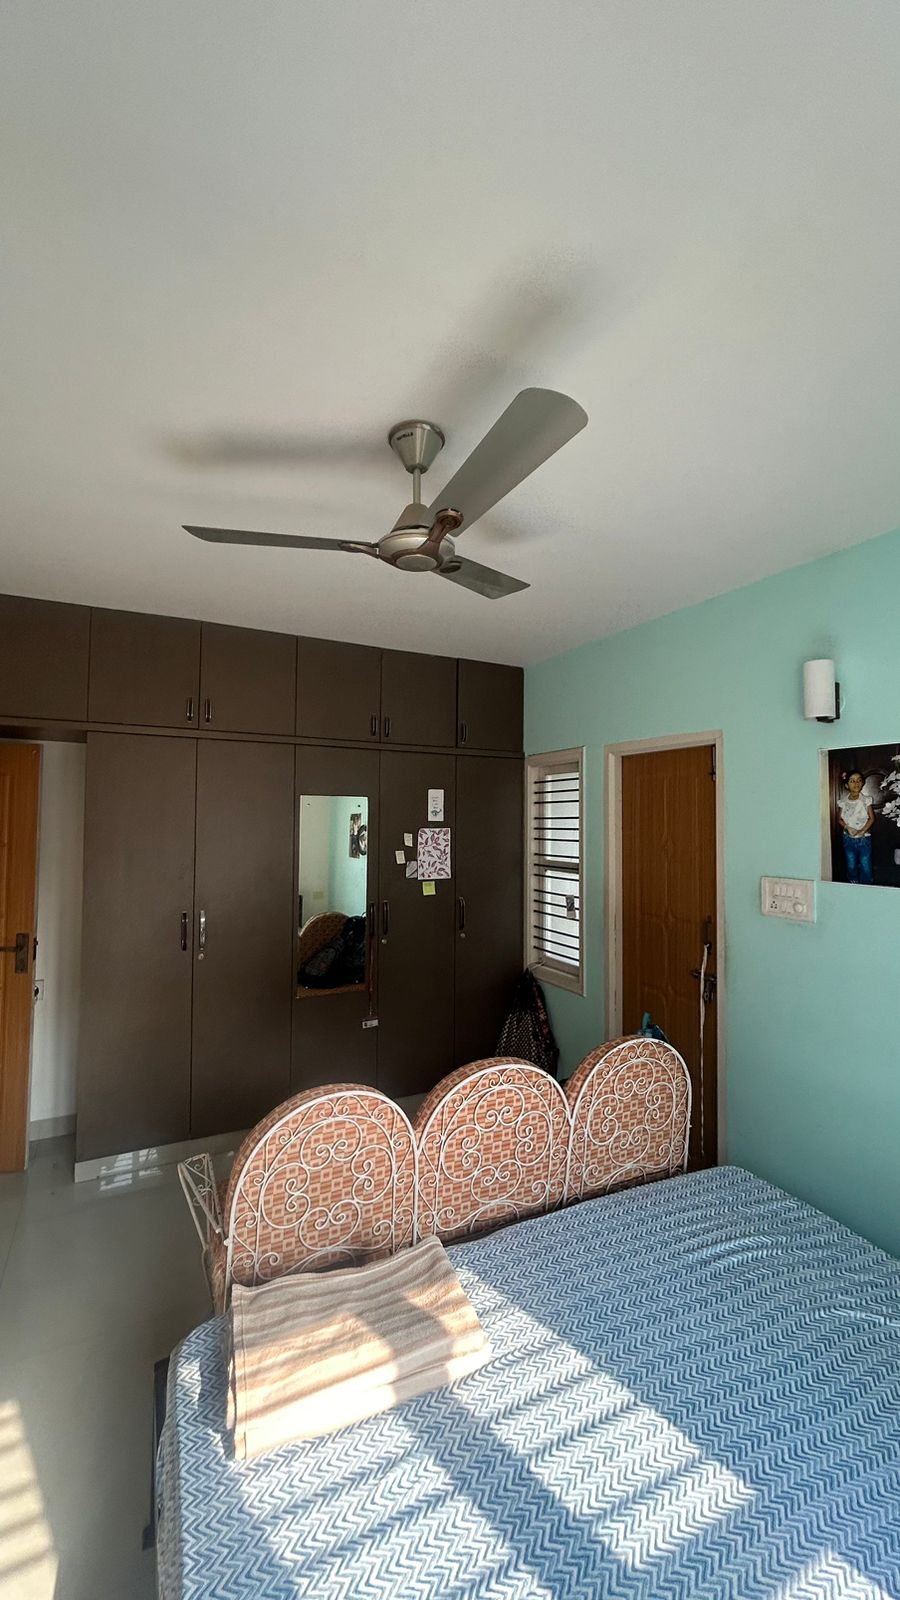 2 BHK Residential Apartment for Lease Only at JAM-6860 in Basava Nagar